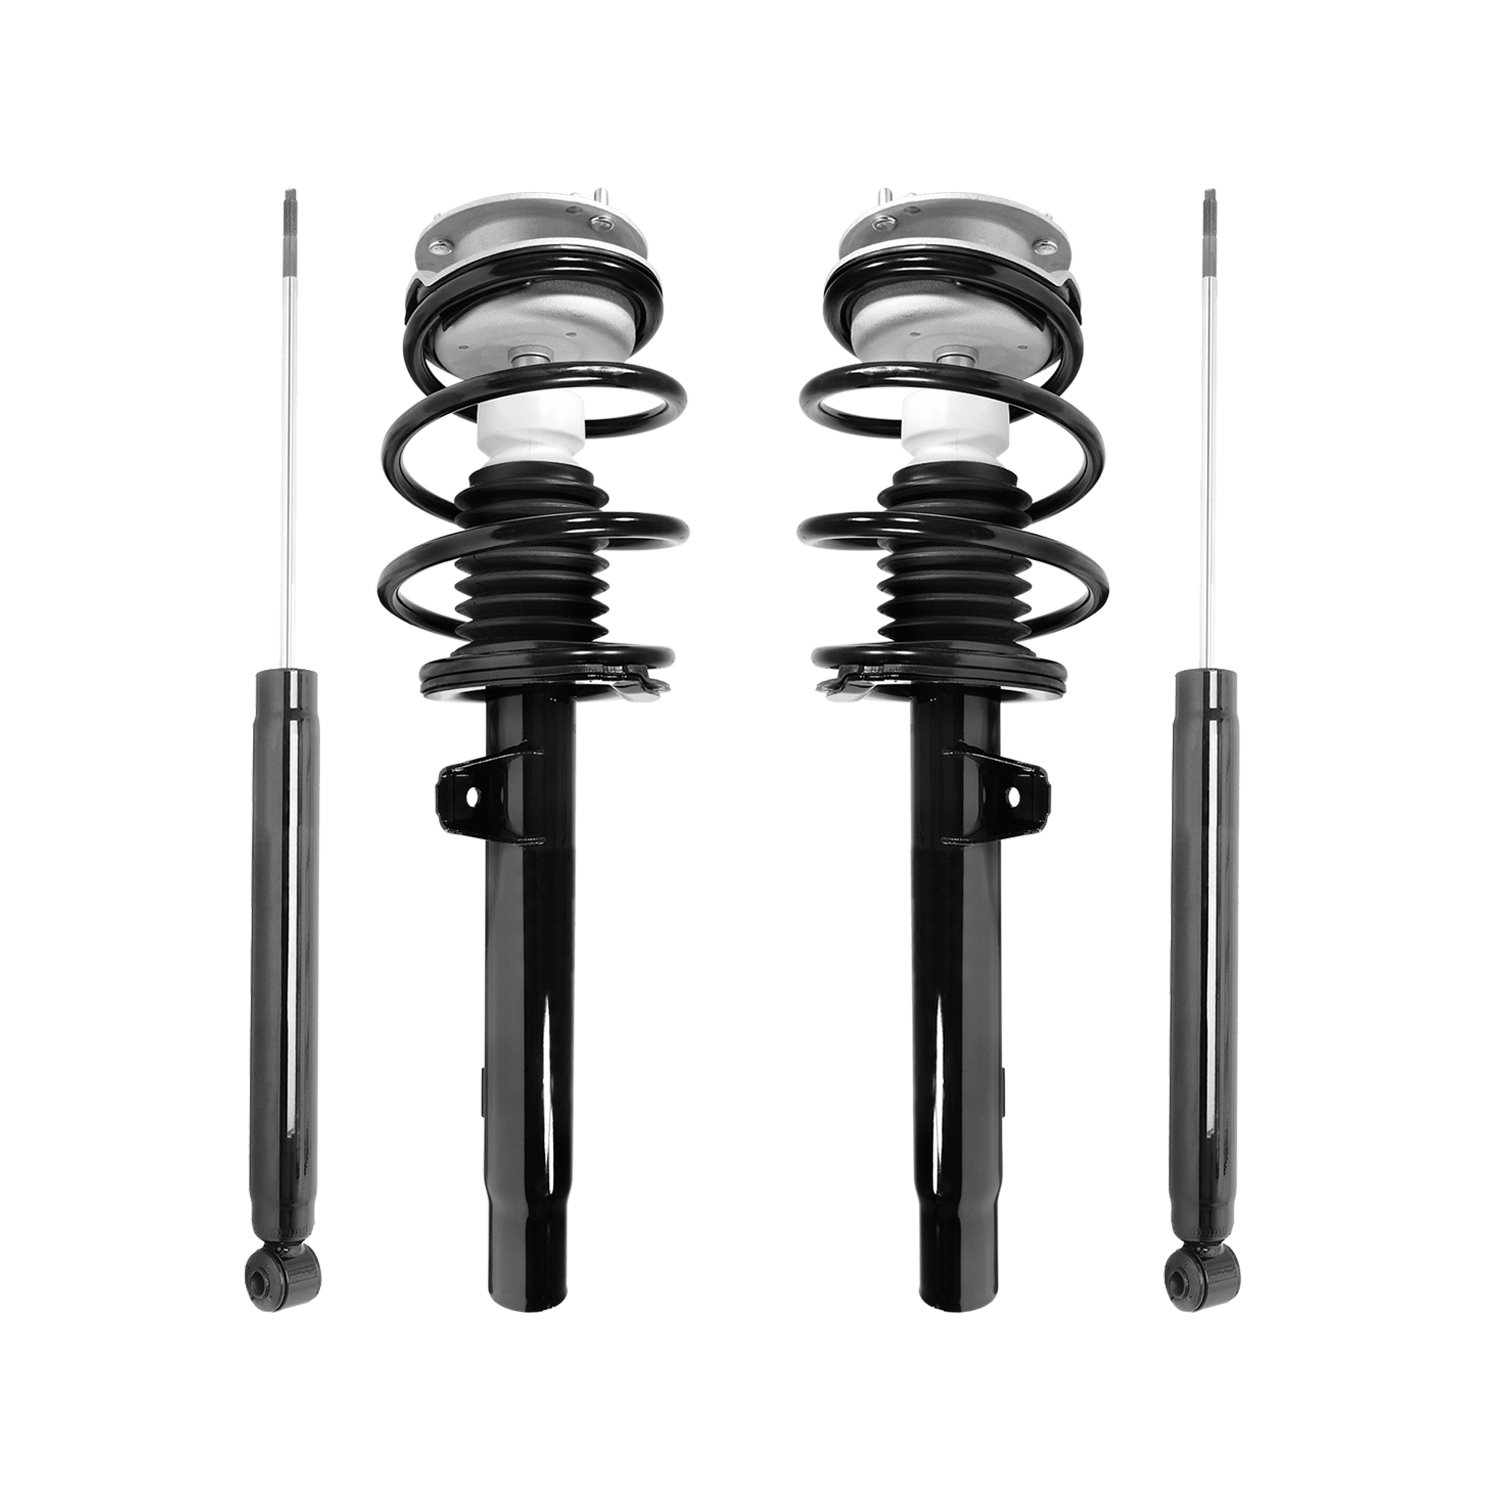 4-11371-259010-001 Front & Rear Suspension Strut & Coil Spring Assembly Fits Select BMW